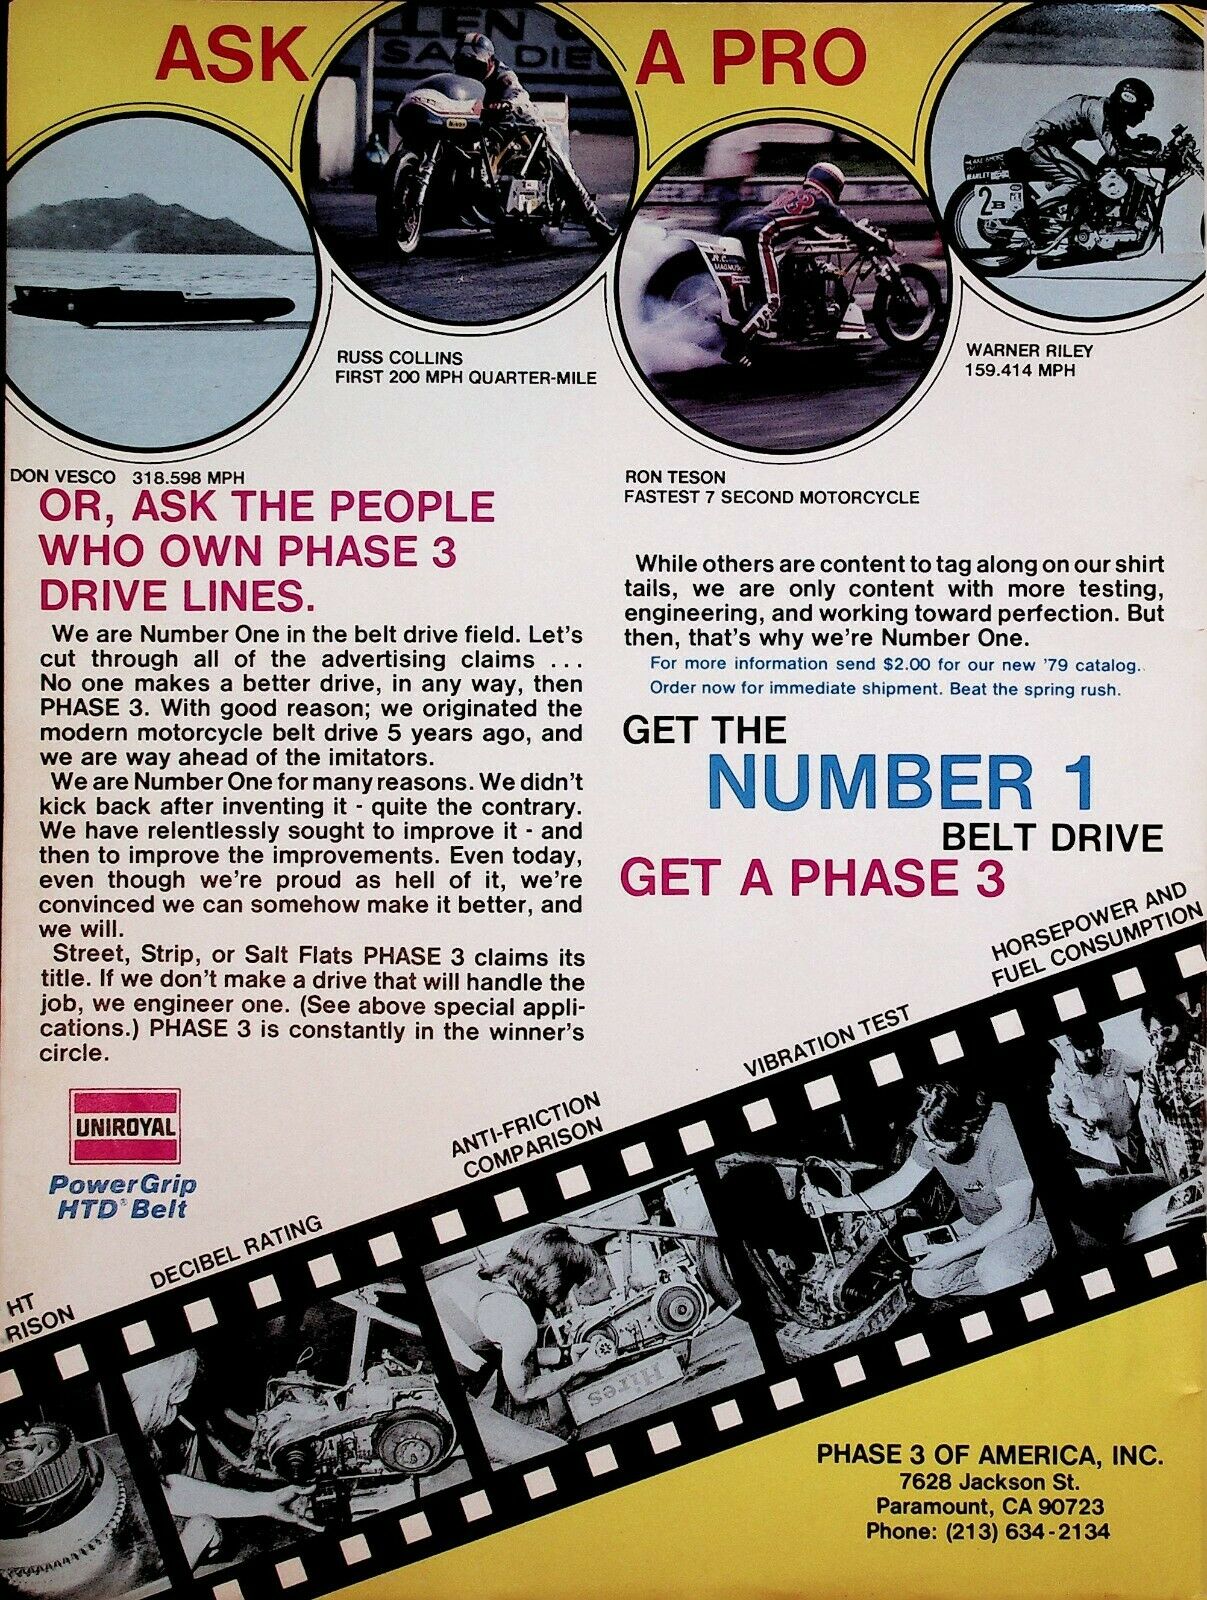 1979 Phase 3 Drive Lines - Russ Collins Don Vesco & More - Vintage Motorcycle Ad